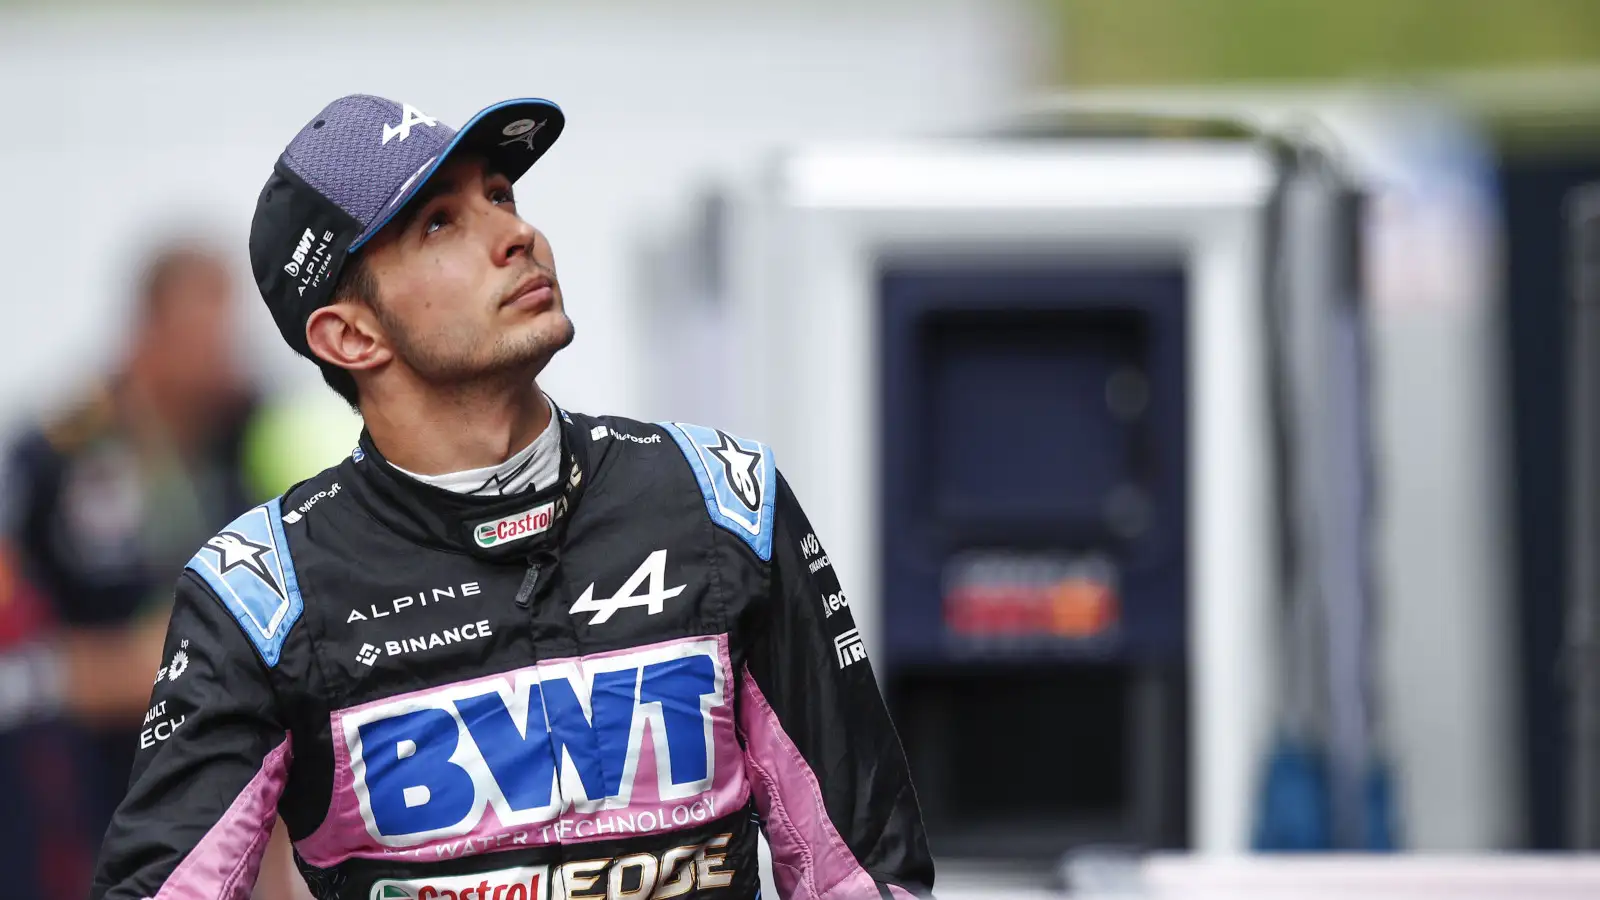 Esteban Ocon has his eye on the new opposition at Silverstone